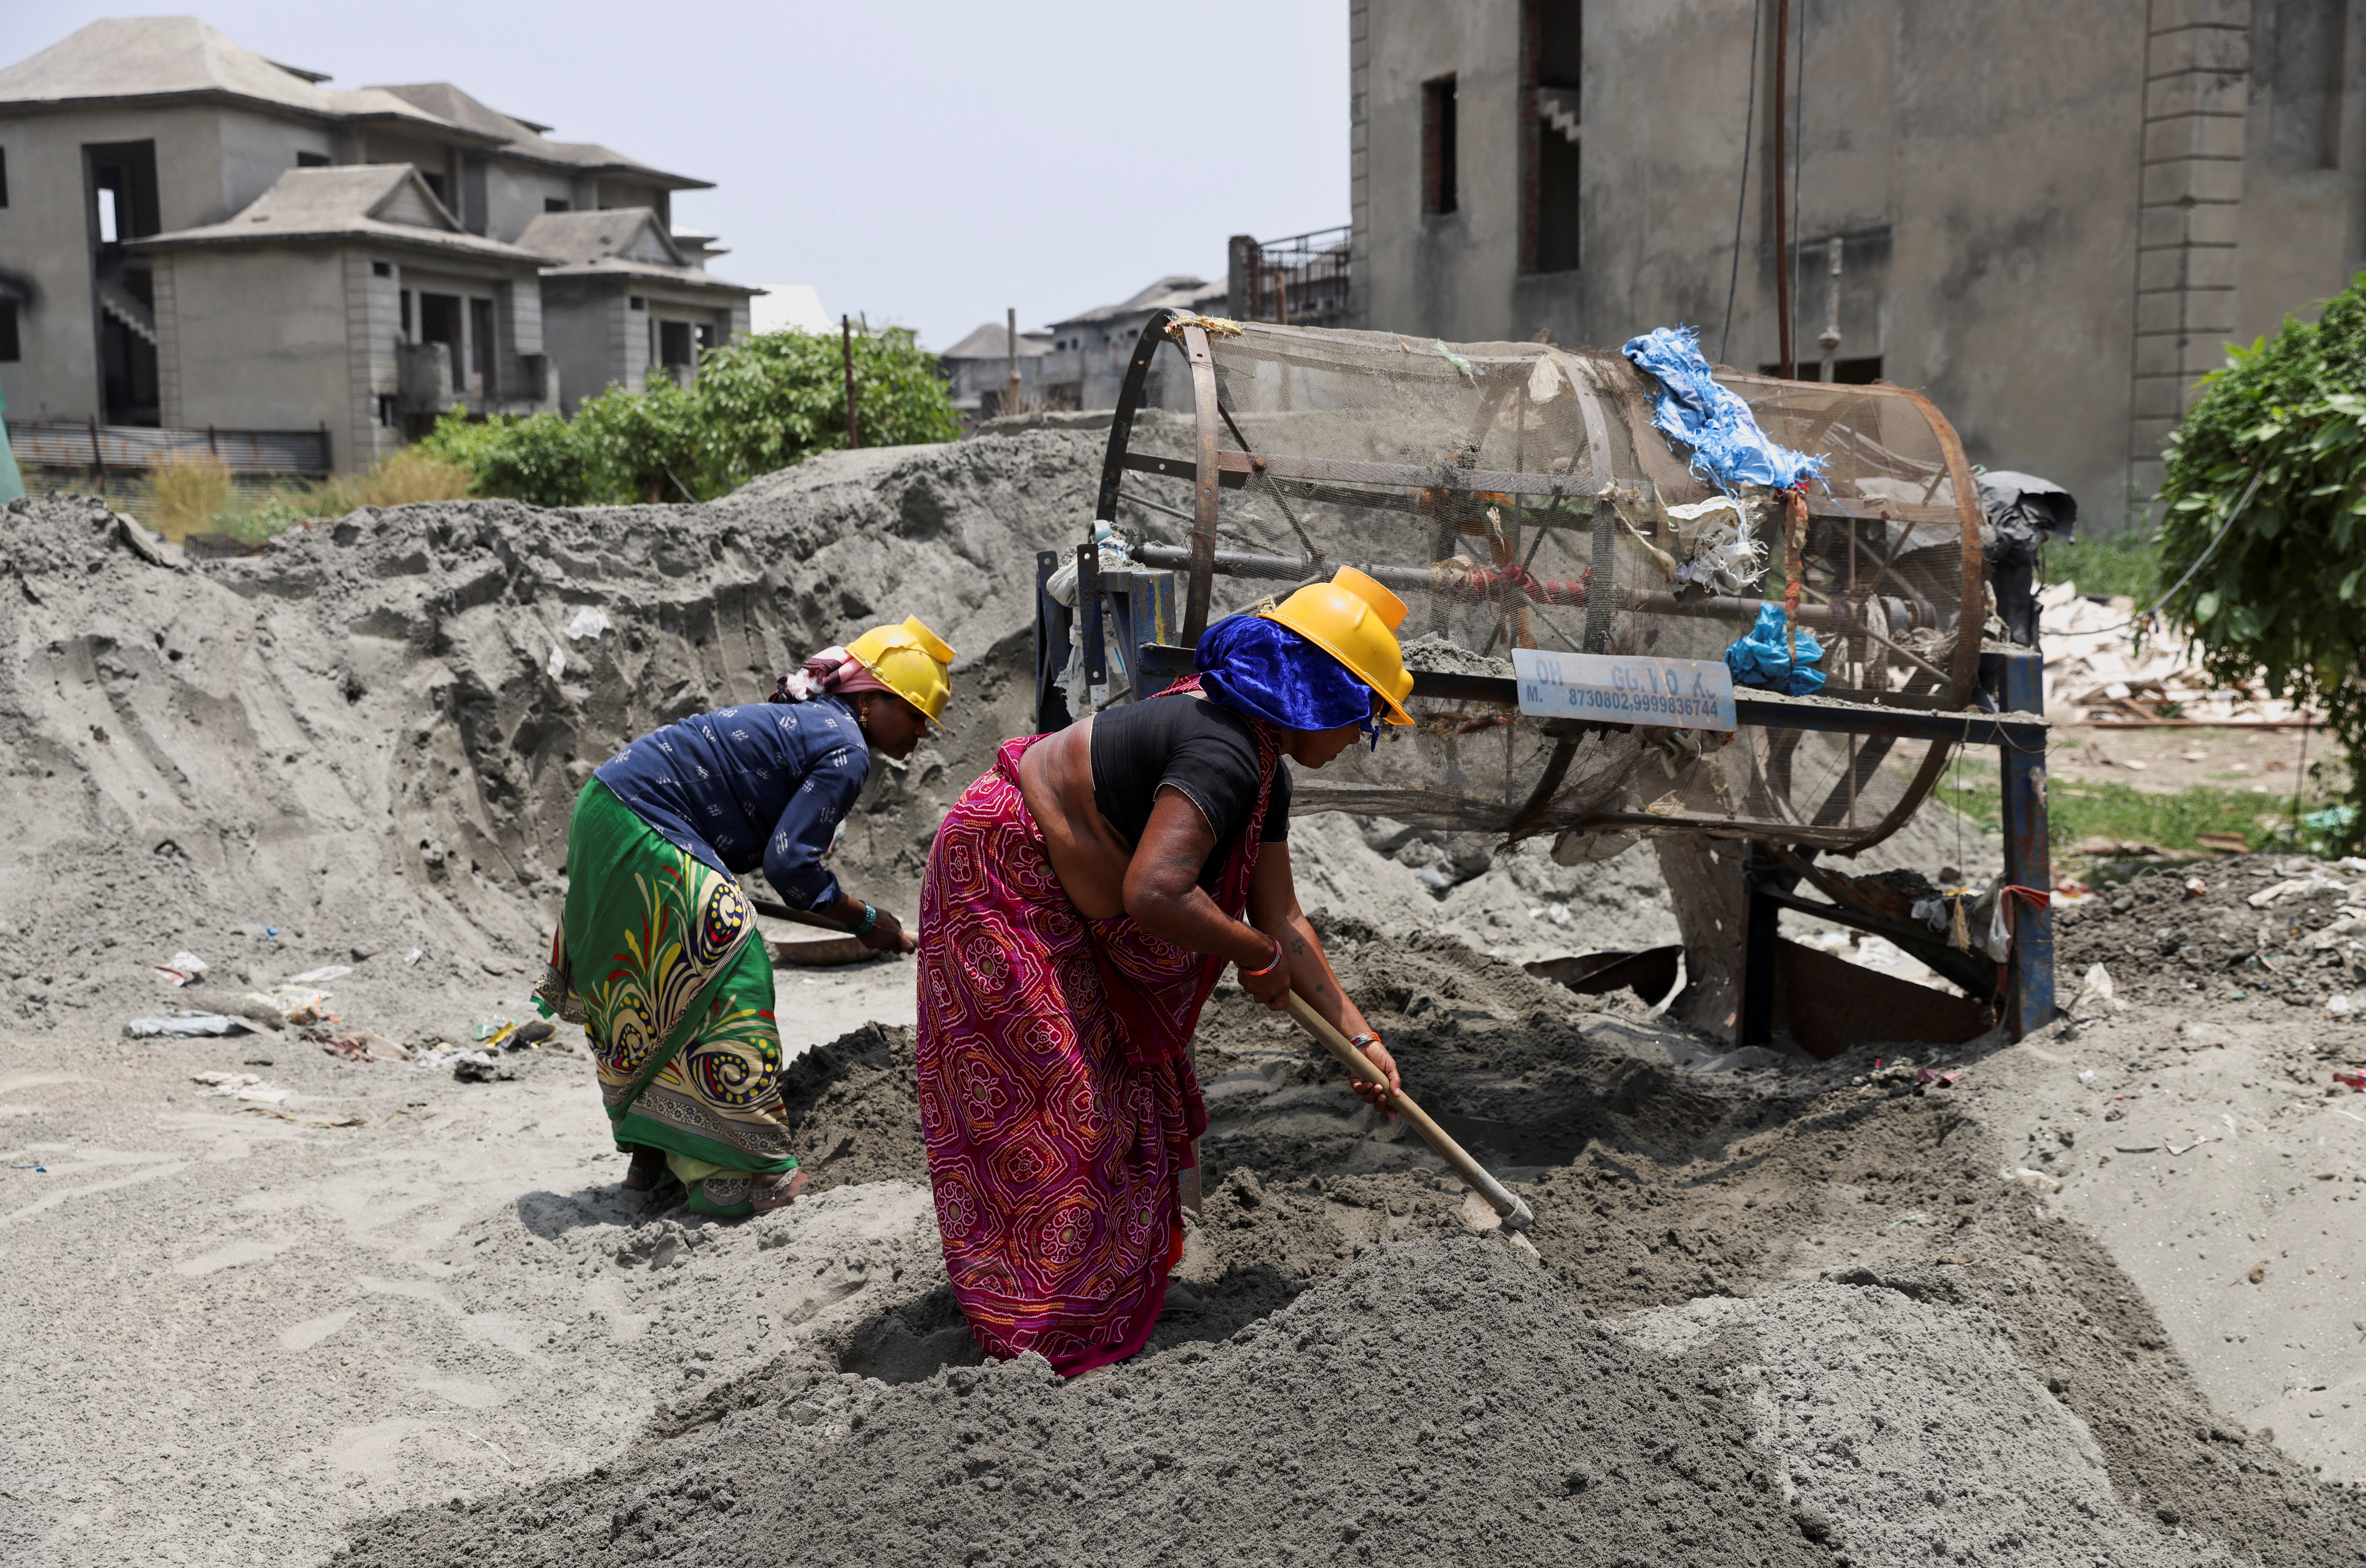 Labourers work at a construction site on a hot summer day, in Noida